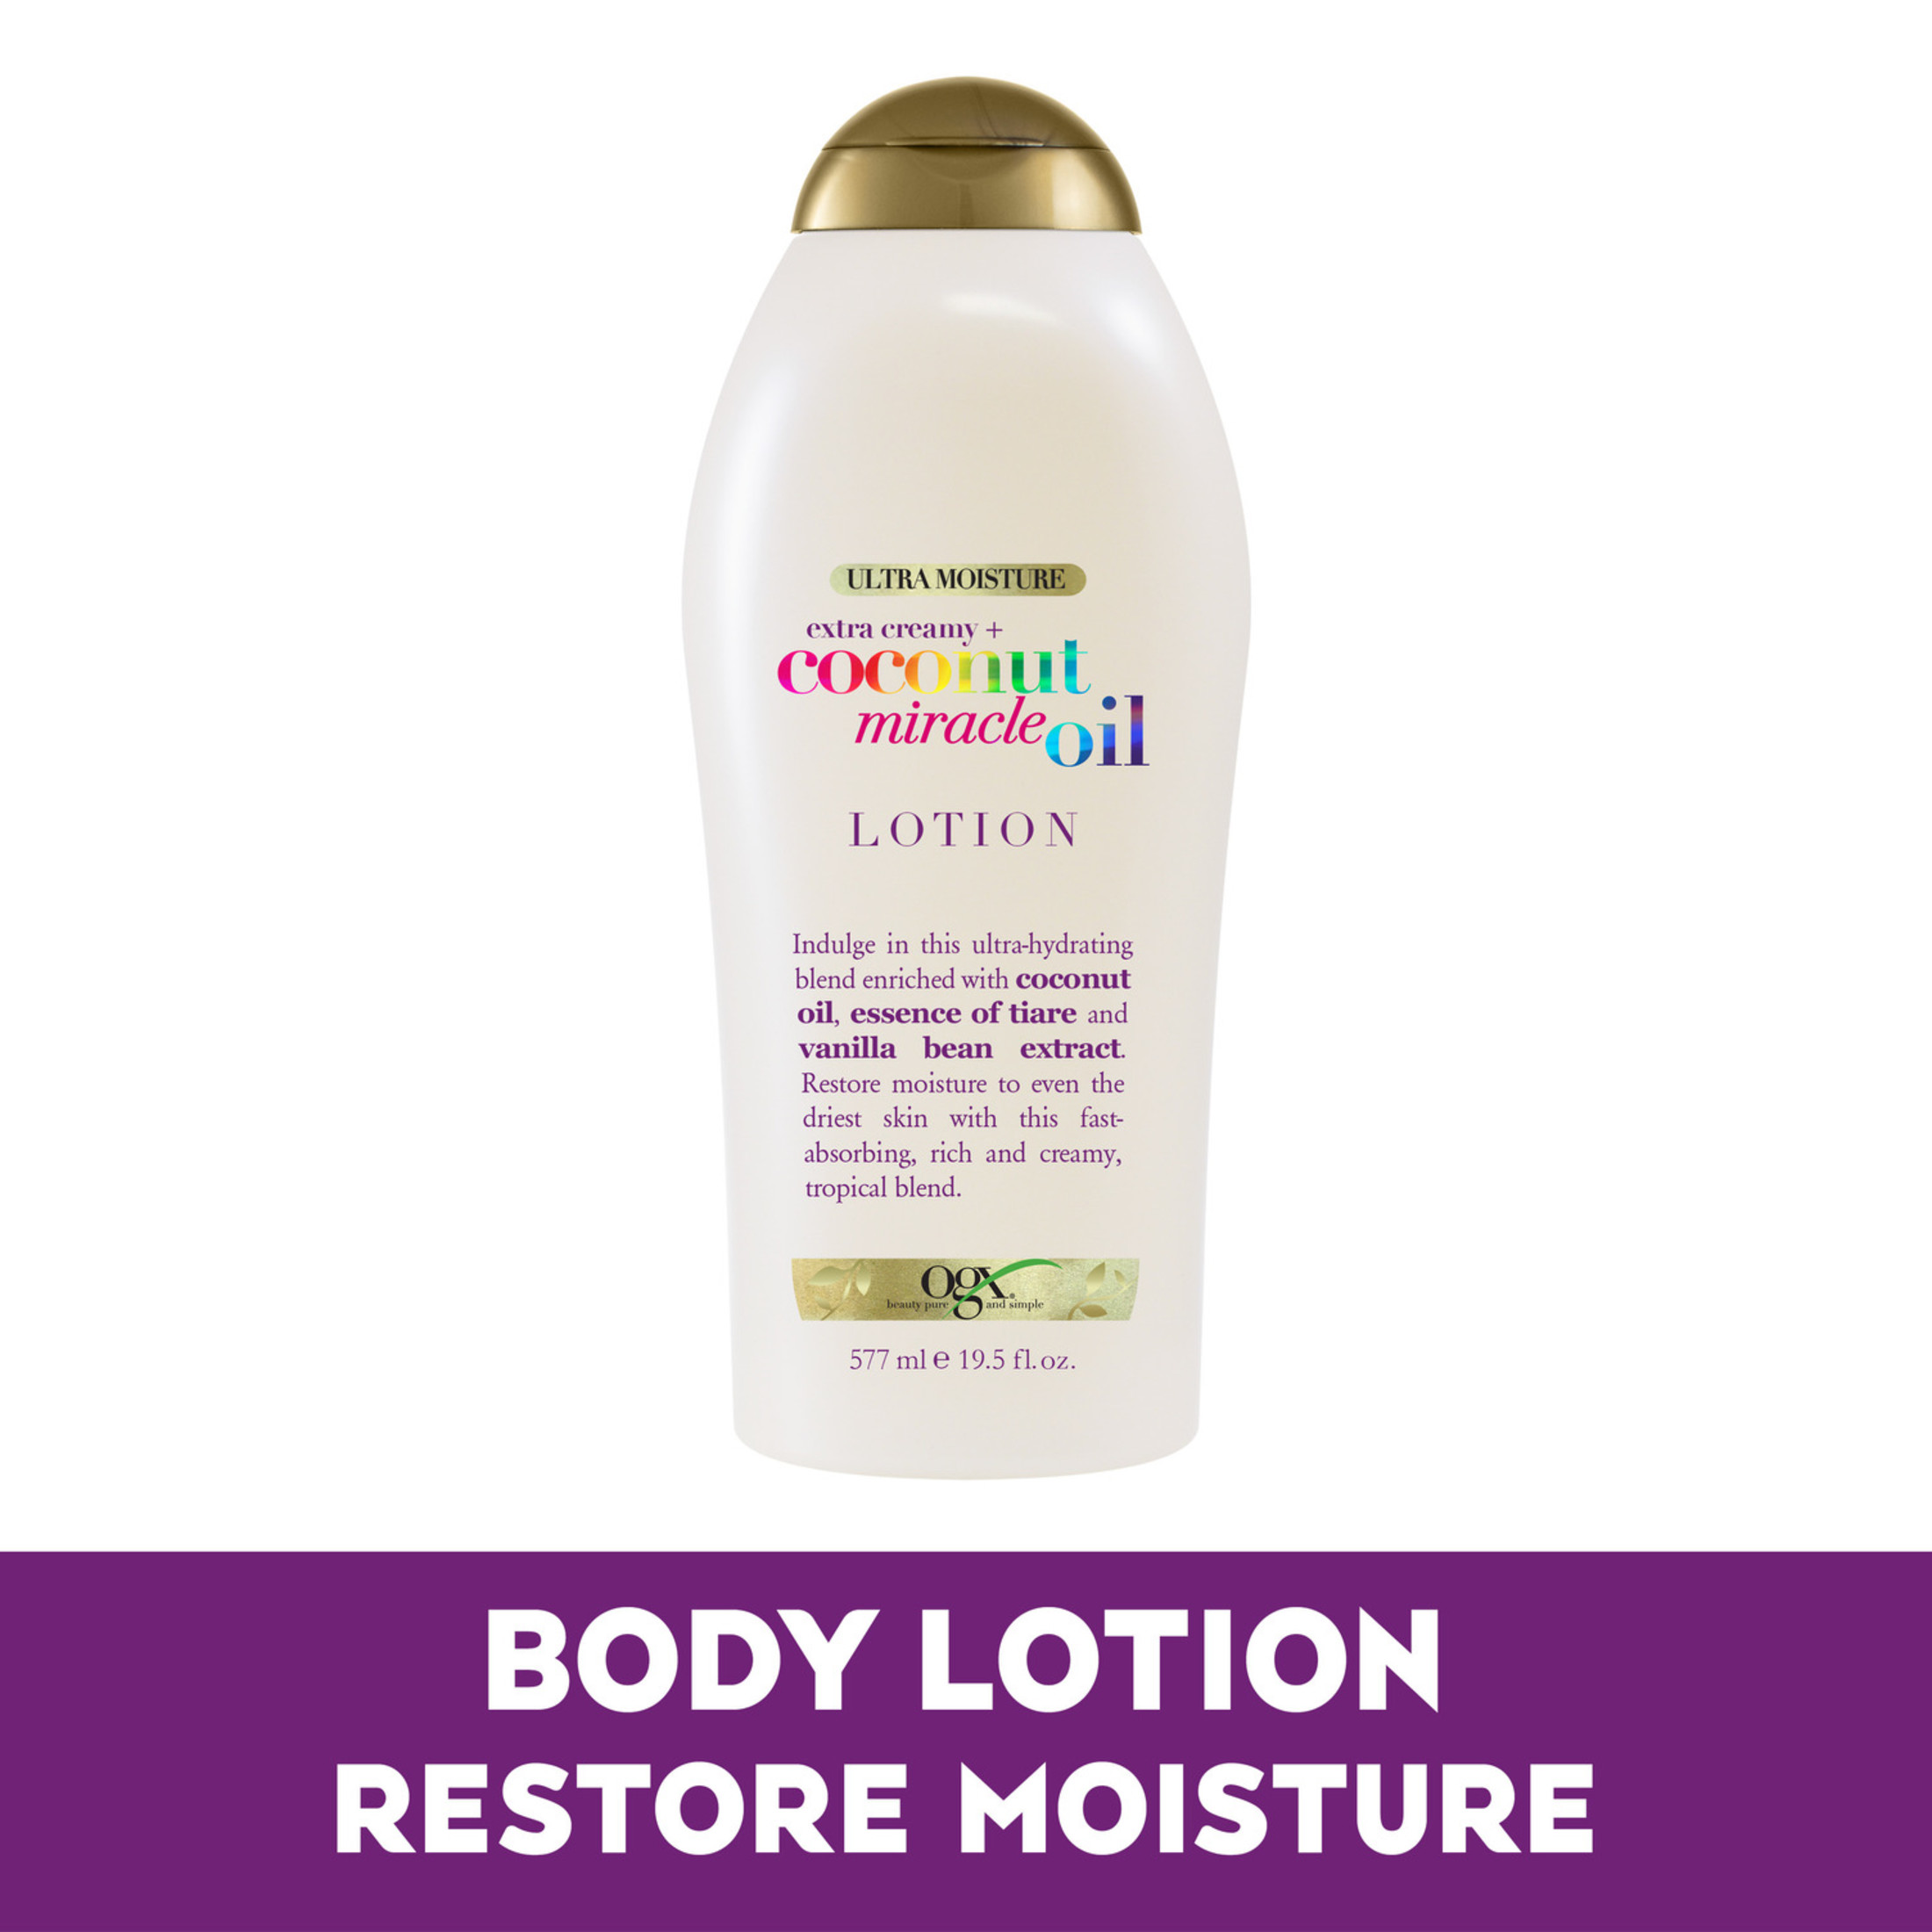 Extra Creamy + Coconut Miracle Oil Body Lotion - image 1 of 4